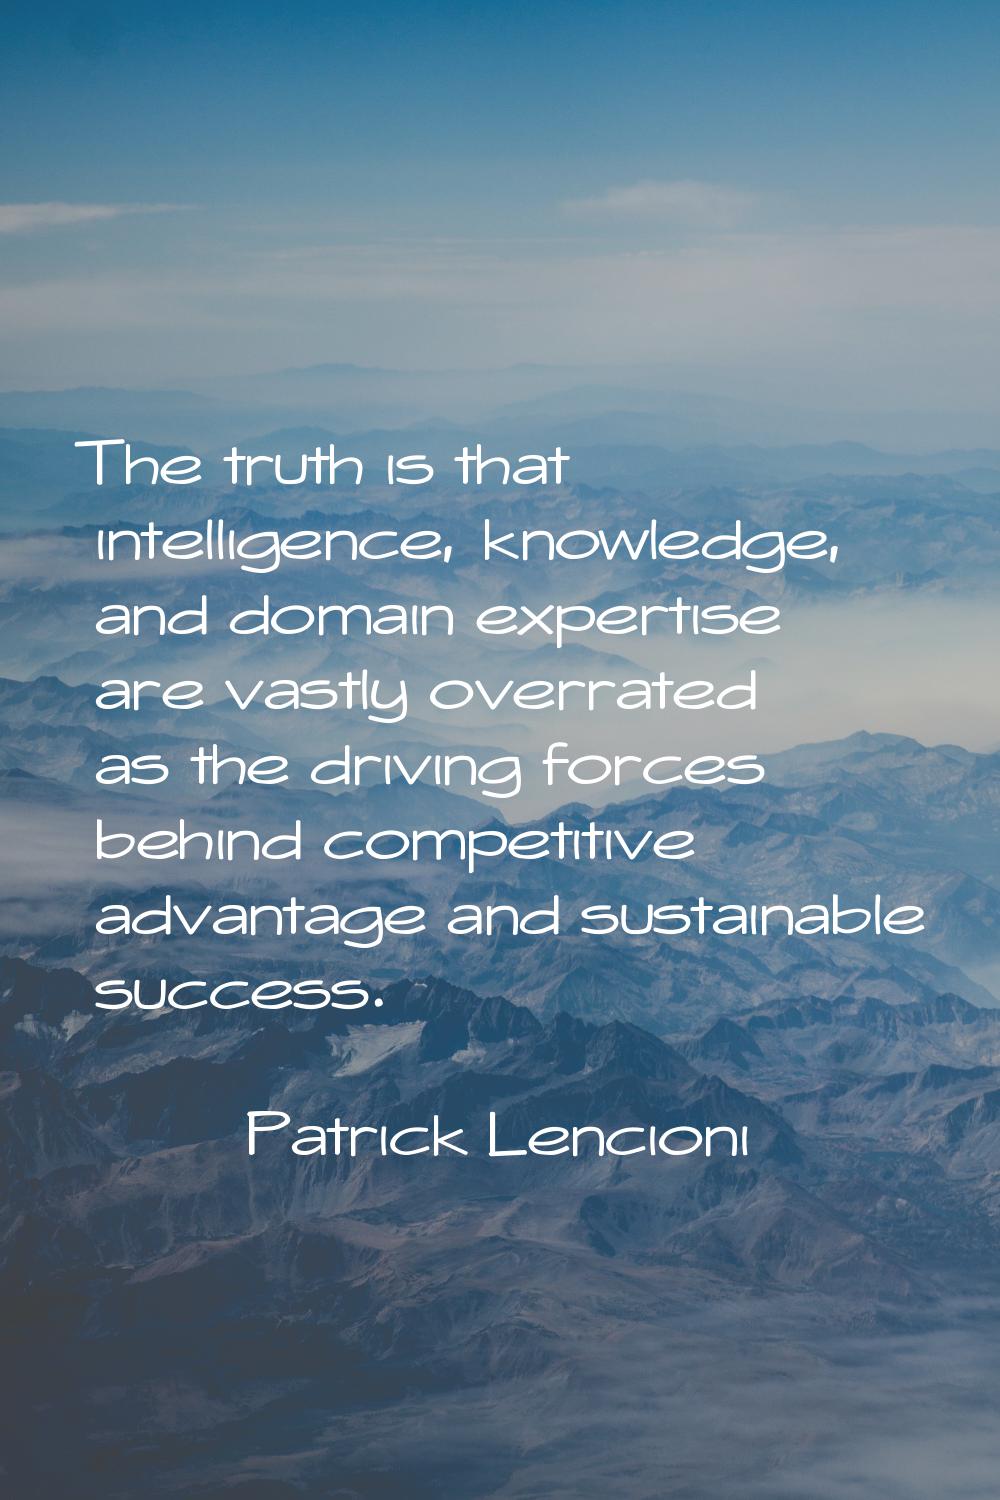 The truth is that intelligence, knowledge, and domain expertise are vastly overrated as the driving